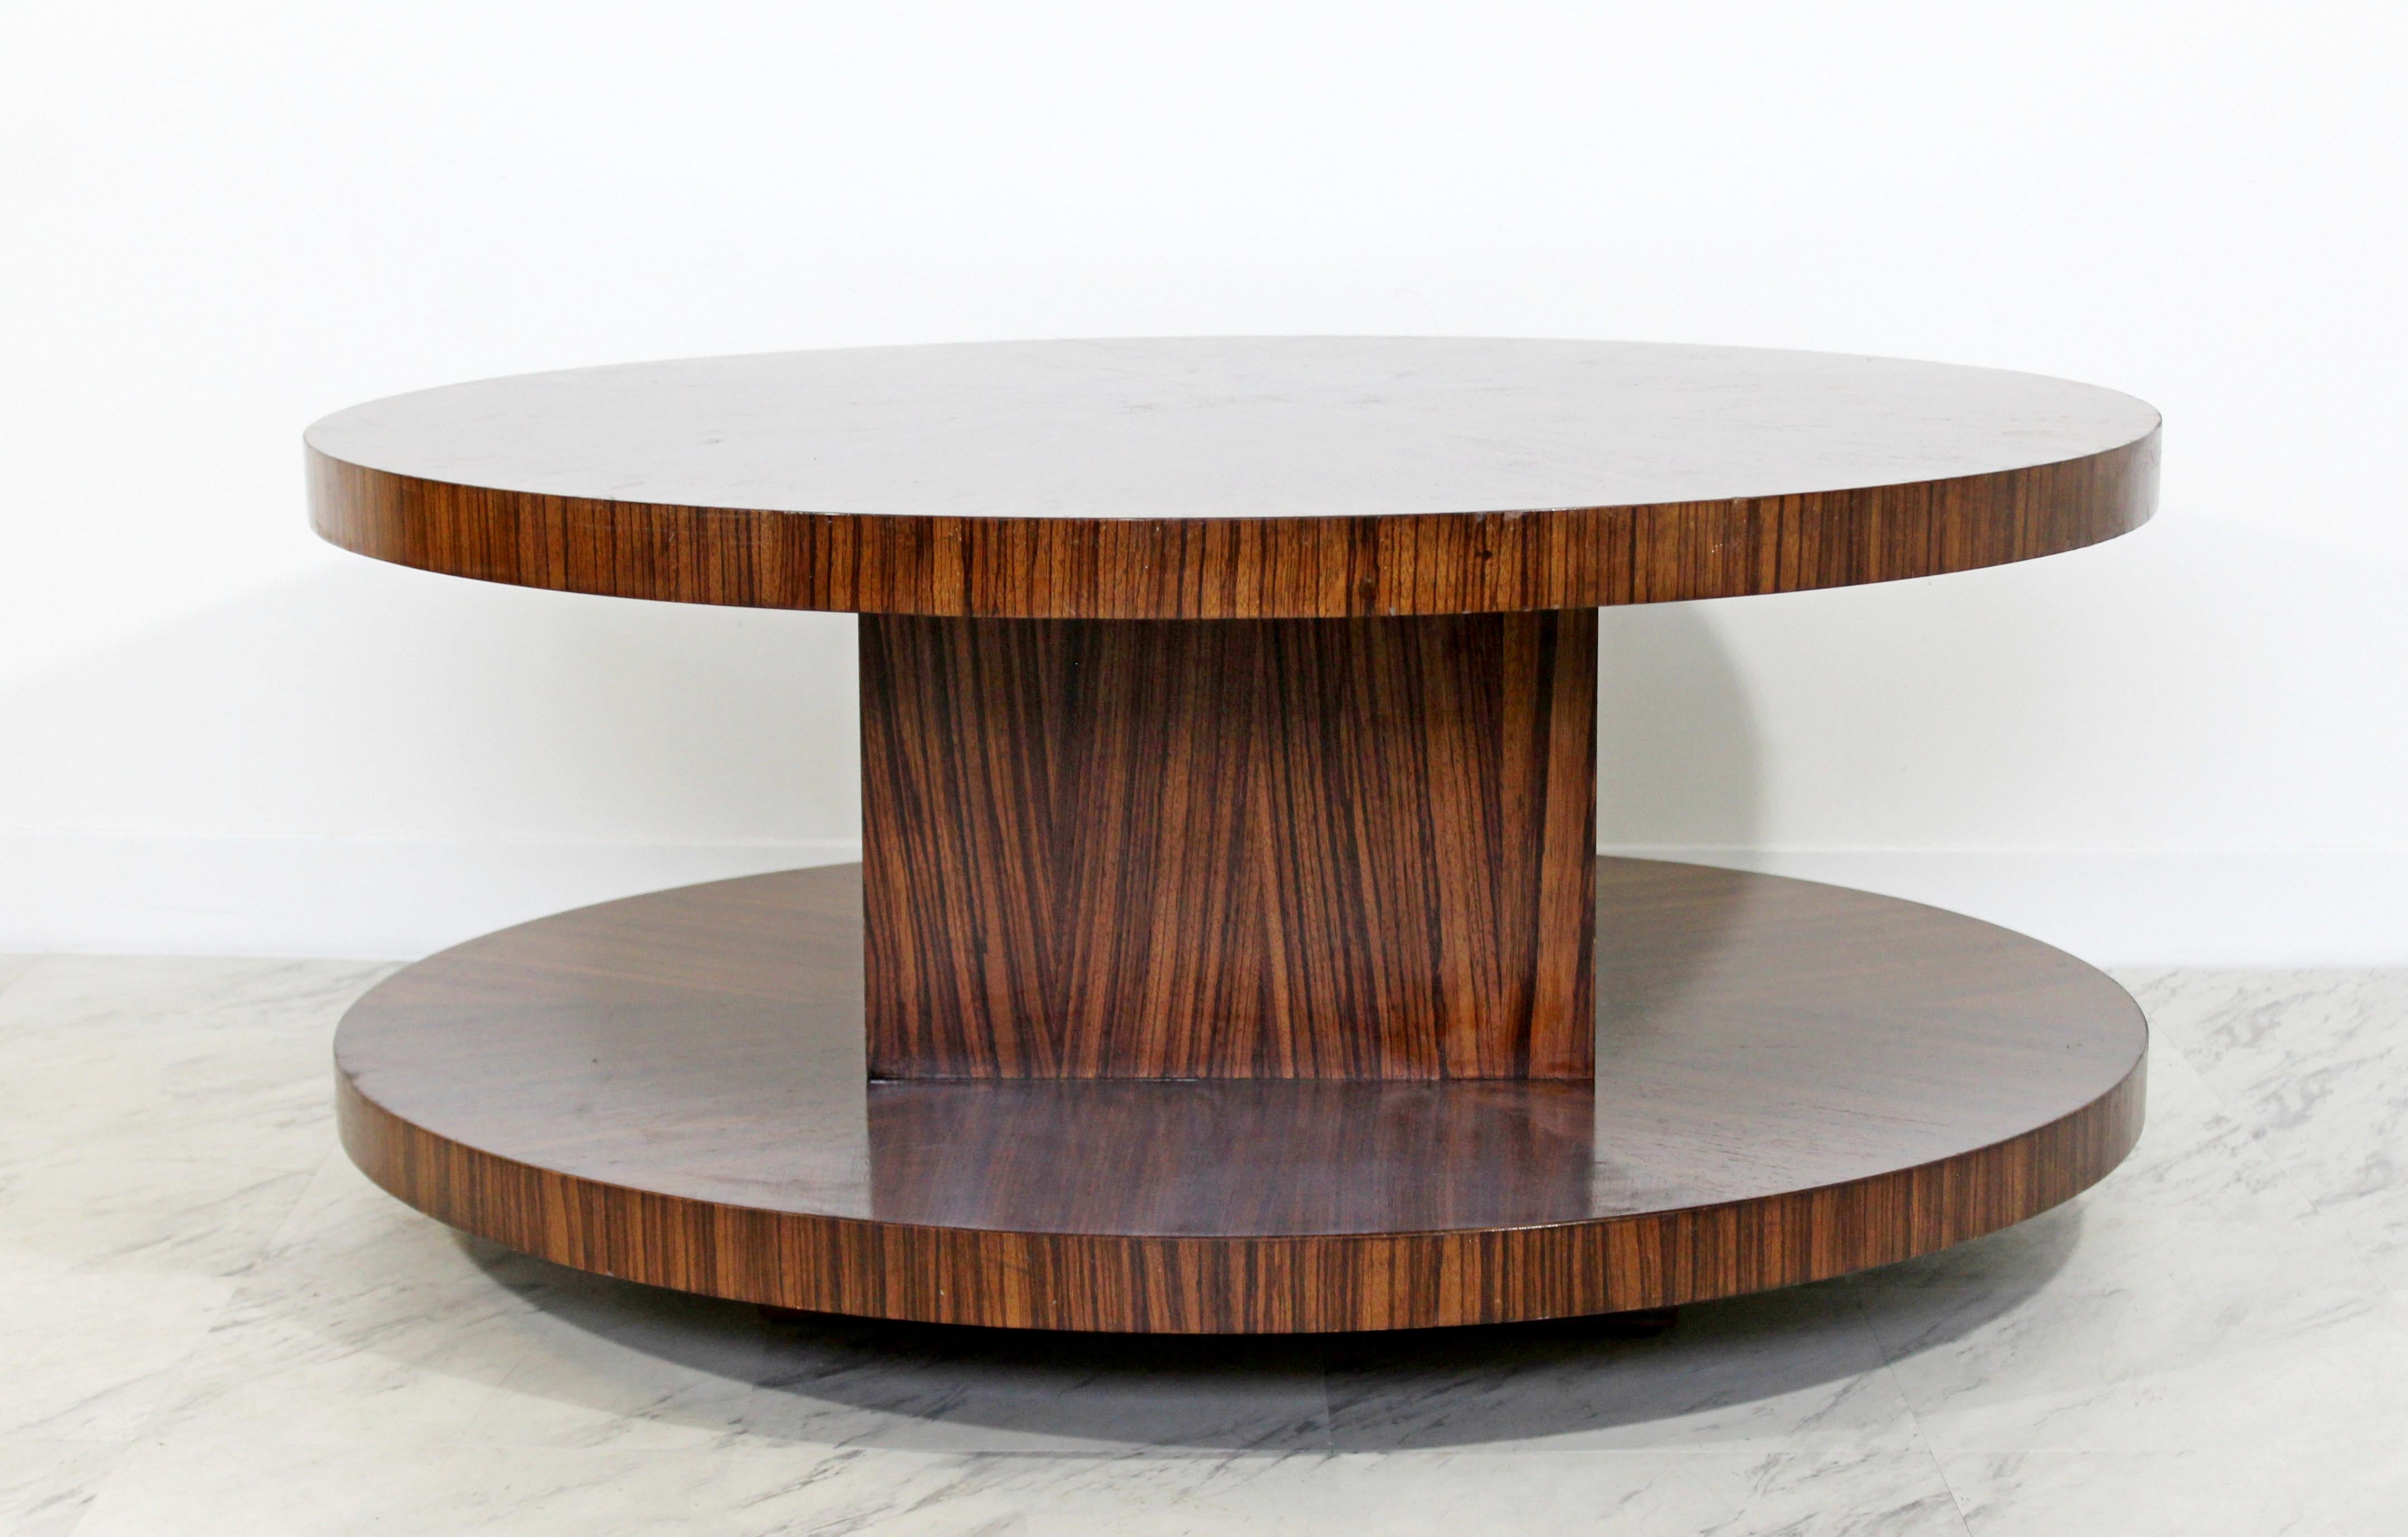 For your consideration is a phenomenally functional, round coffee table, made of zebra wood, and with a swivel top like a Lazy Susan, by Memphis, circa the 1970s. In excellent condition. The dimensions are 42